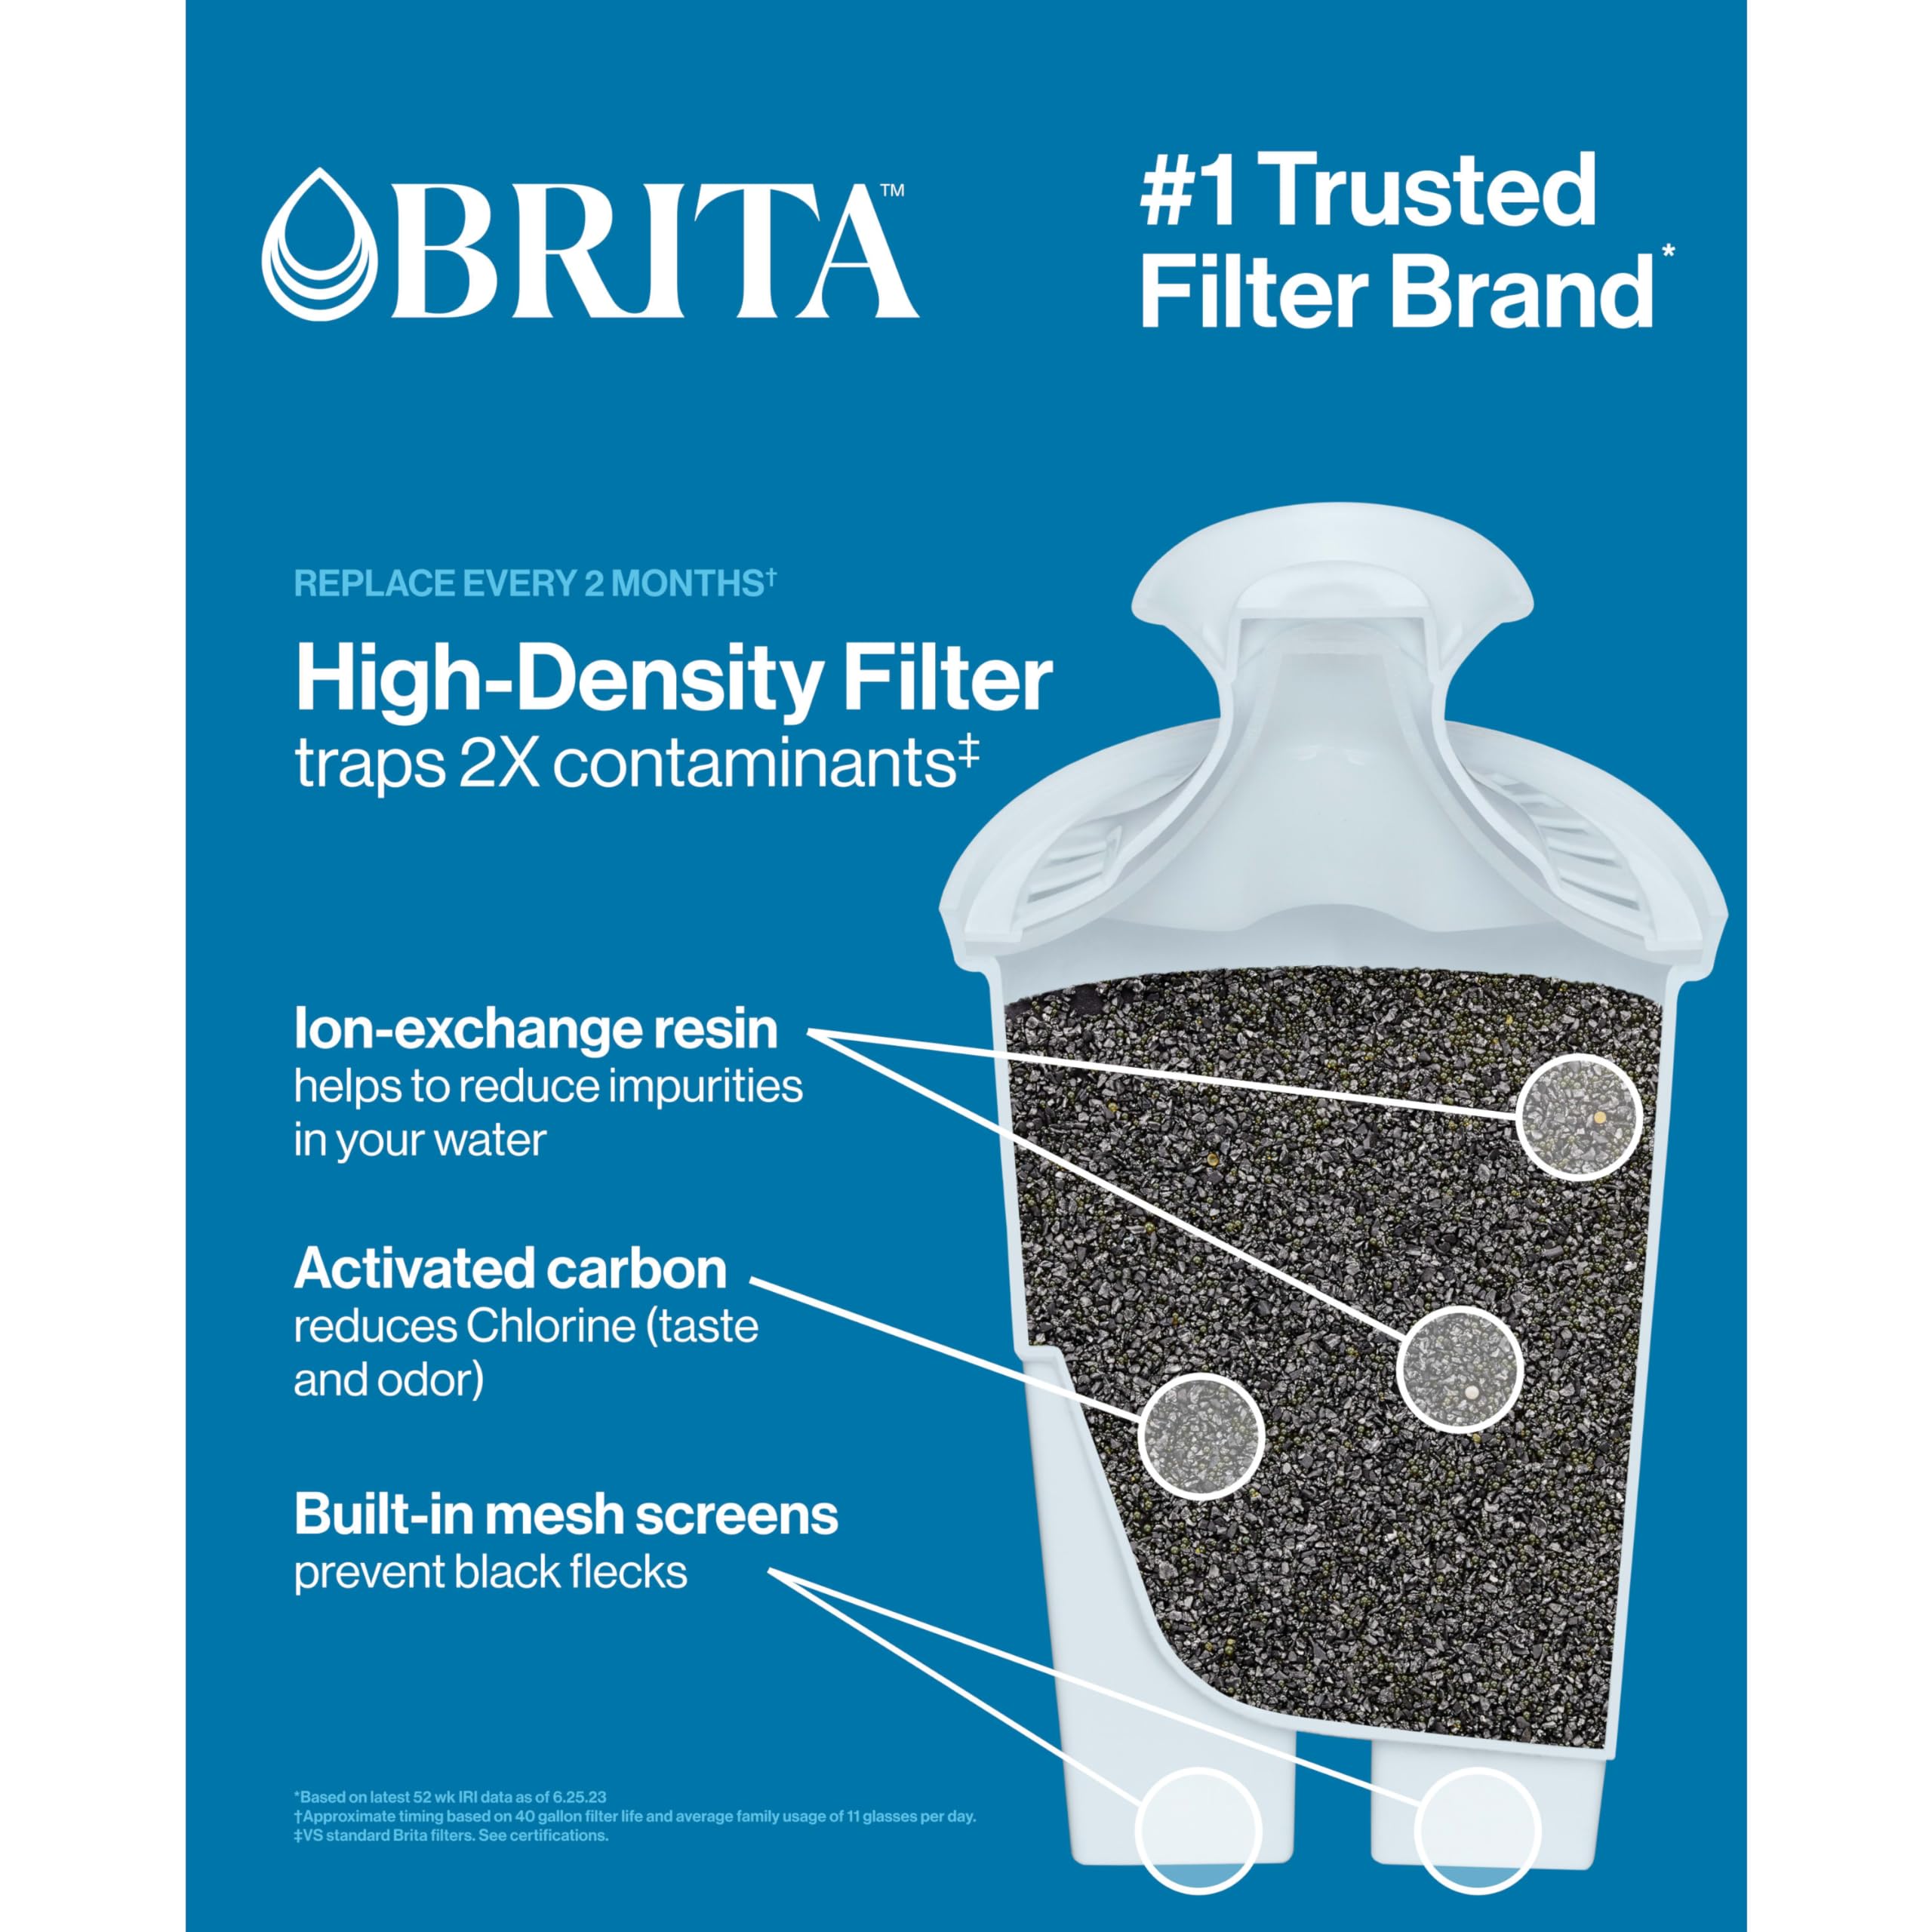 Brita Plus Water Filter, High Density Replacement Filter for Pitchers and Dispensers, Reduces 2x Contaminants*, Lasts 2 Months, 6 Count